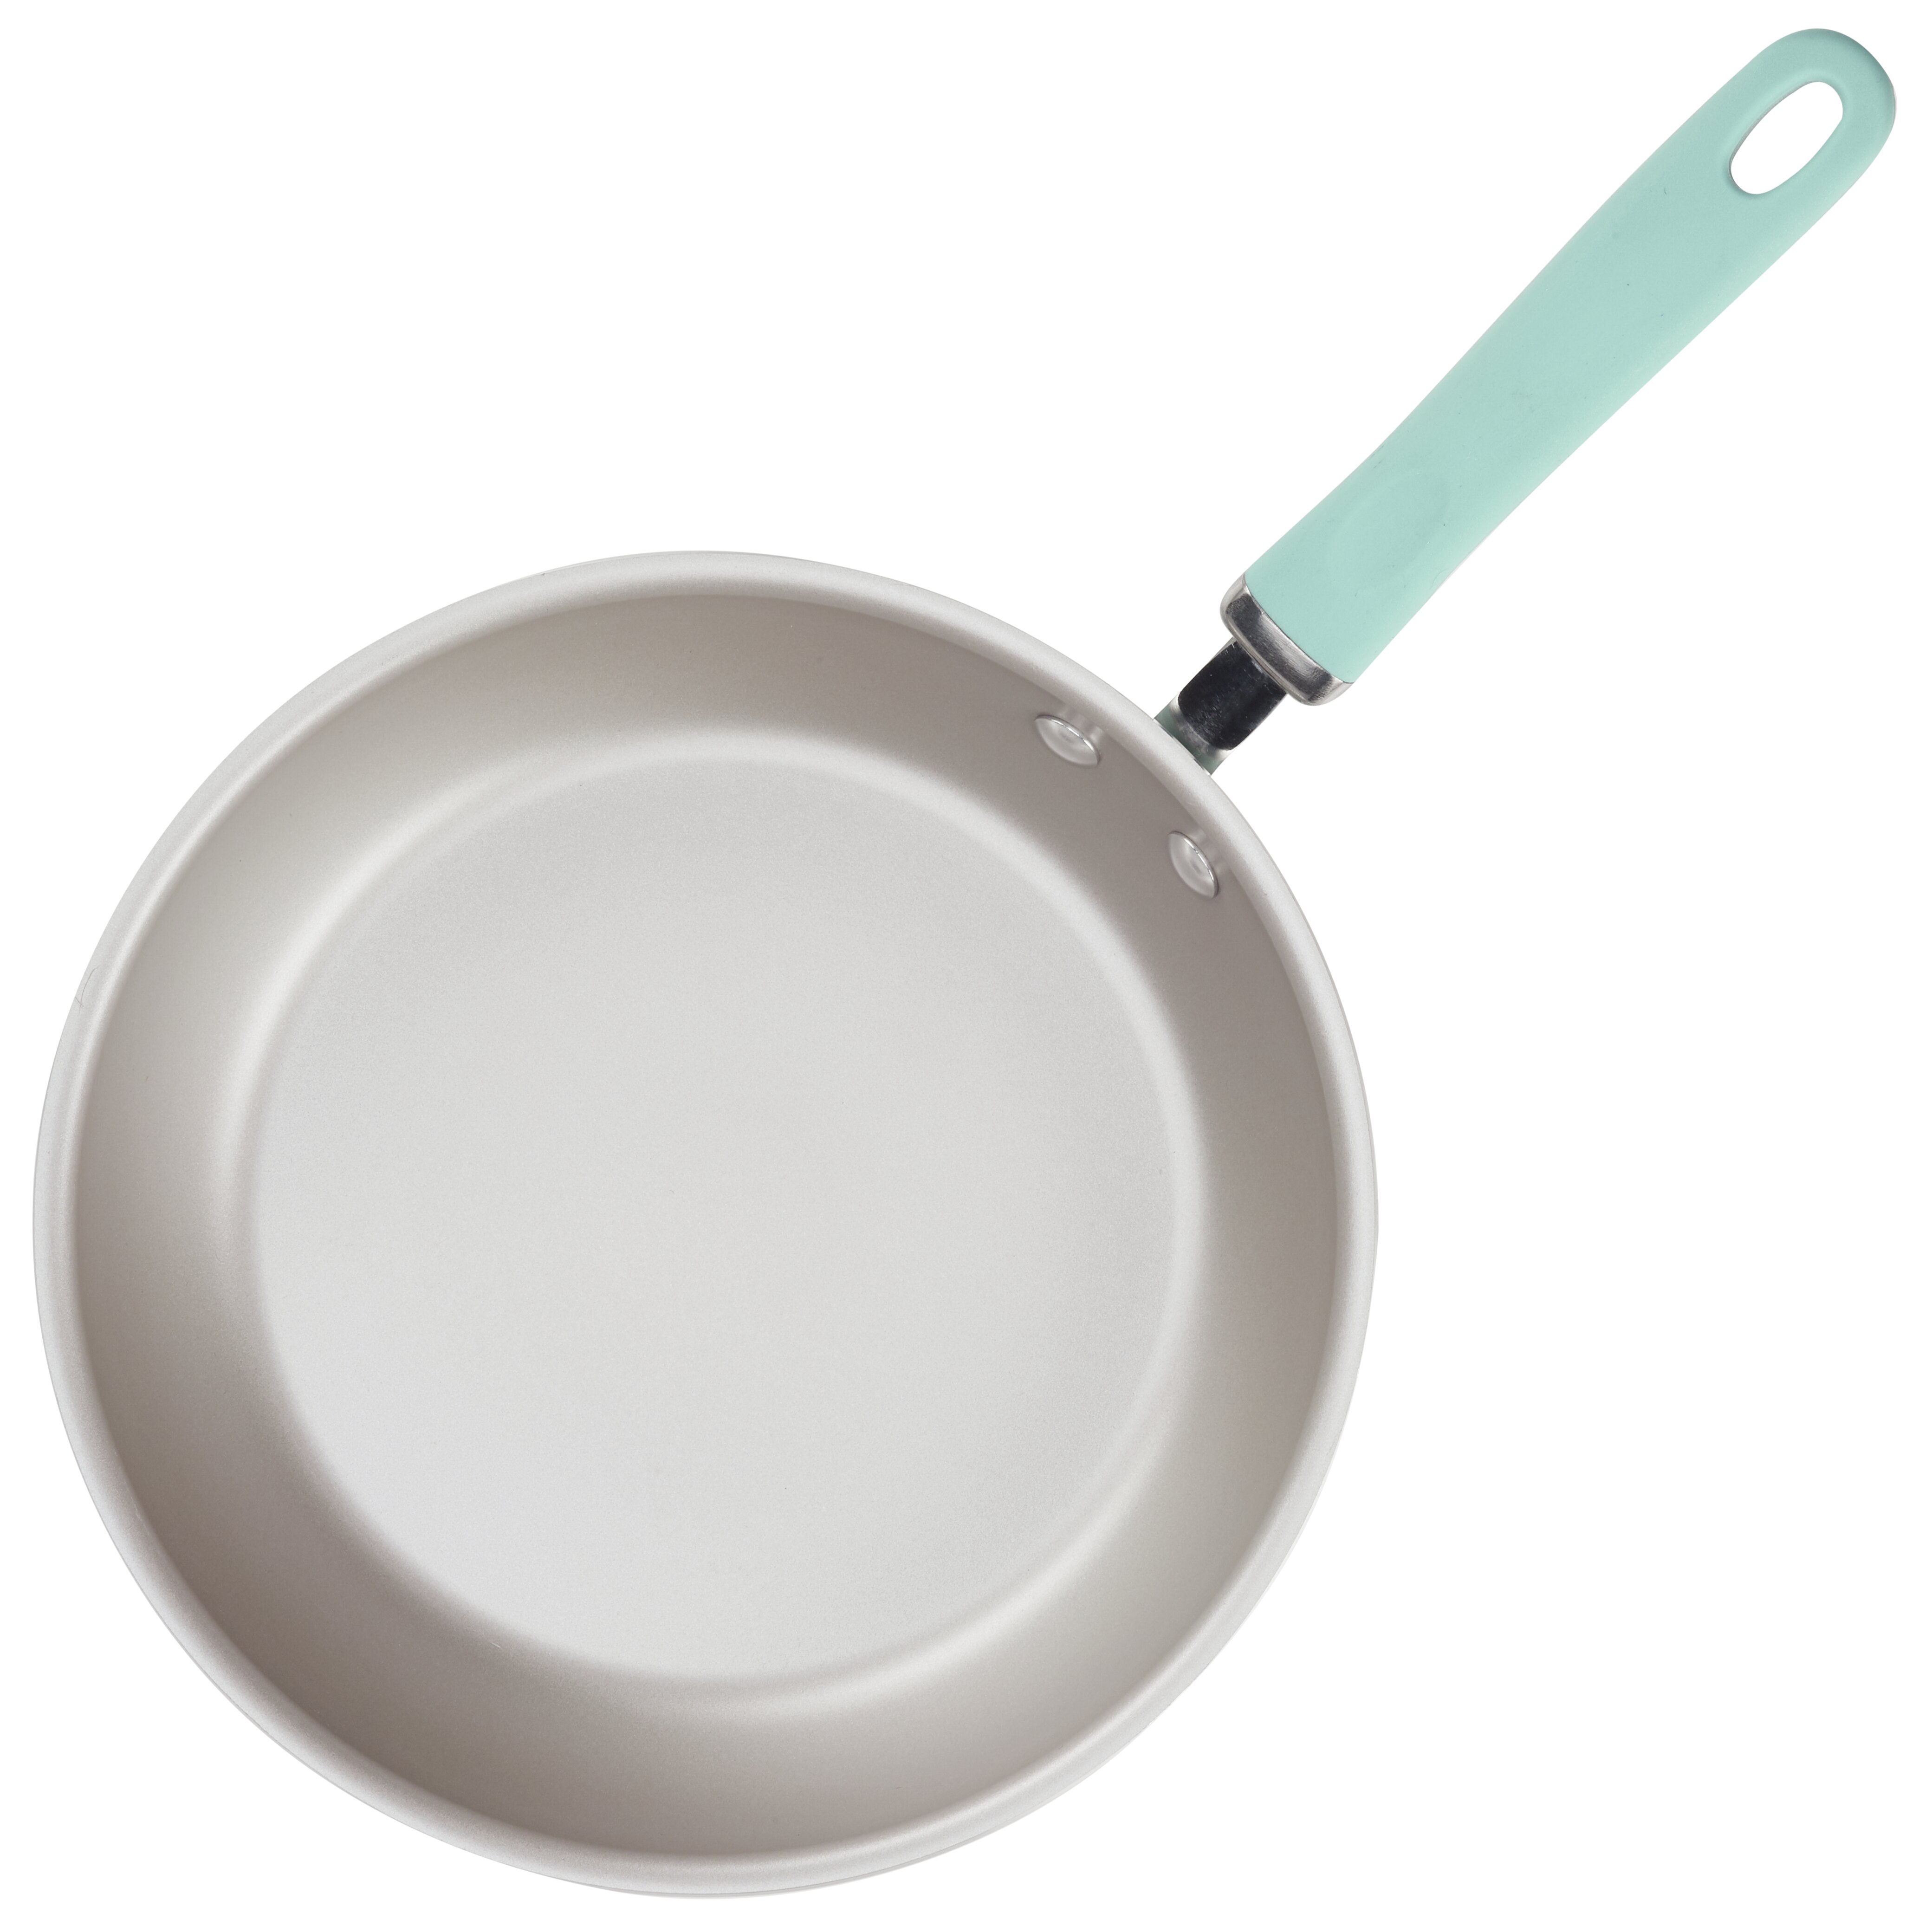 Rachael Ray Create Delicious Deep Nonstick Frying Pan / Fry Pan / Skillet  with Lid - 9.5 Inch, Gray